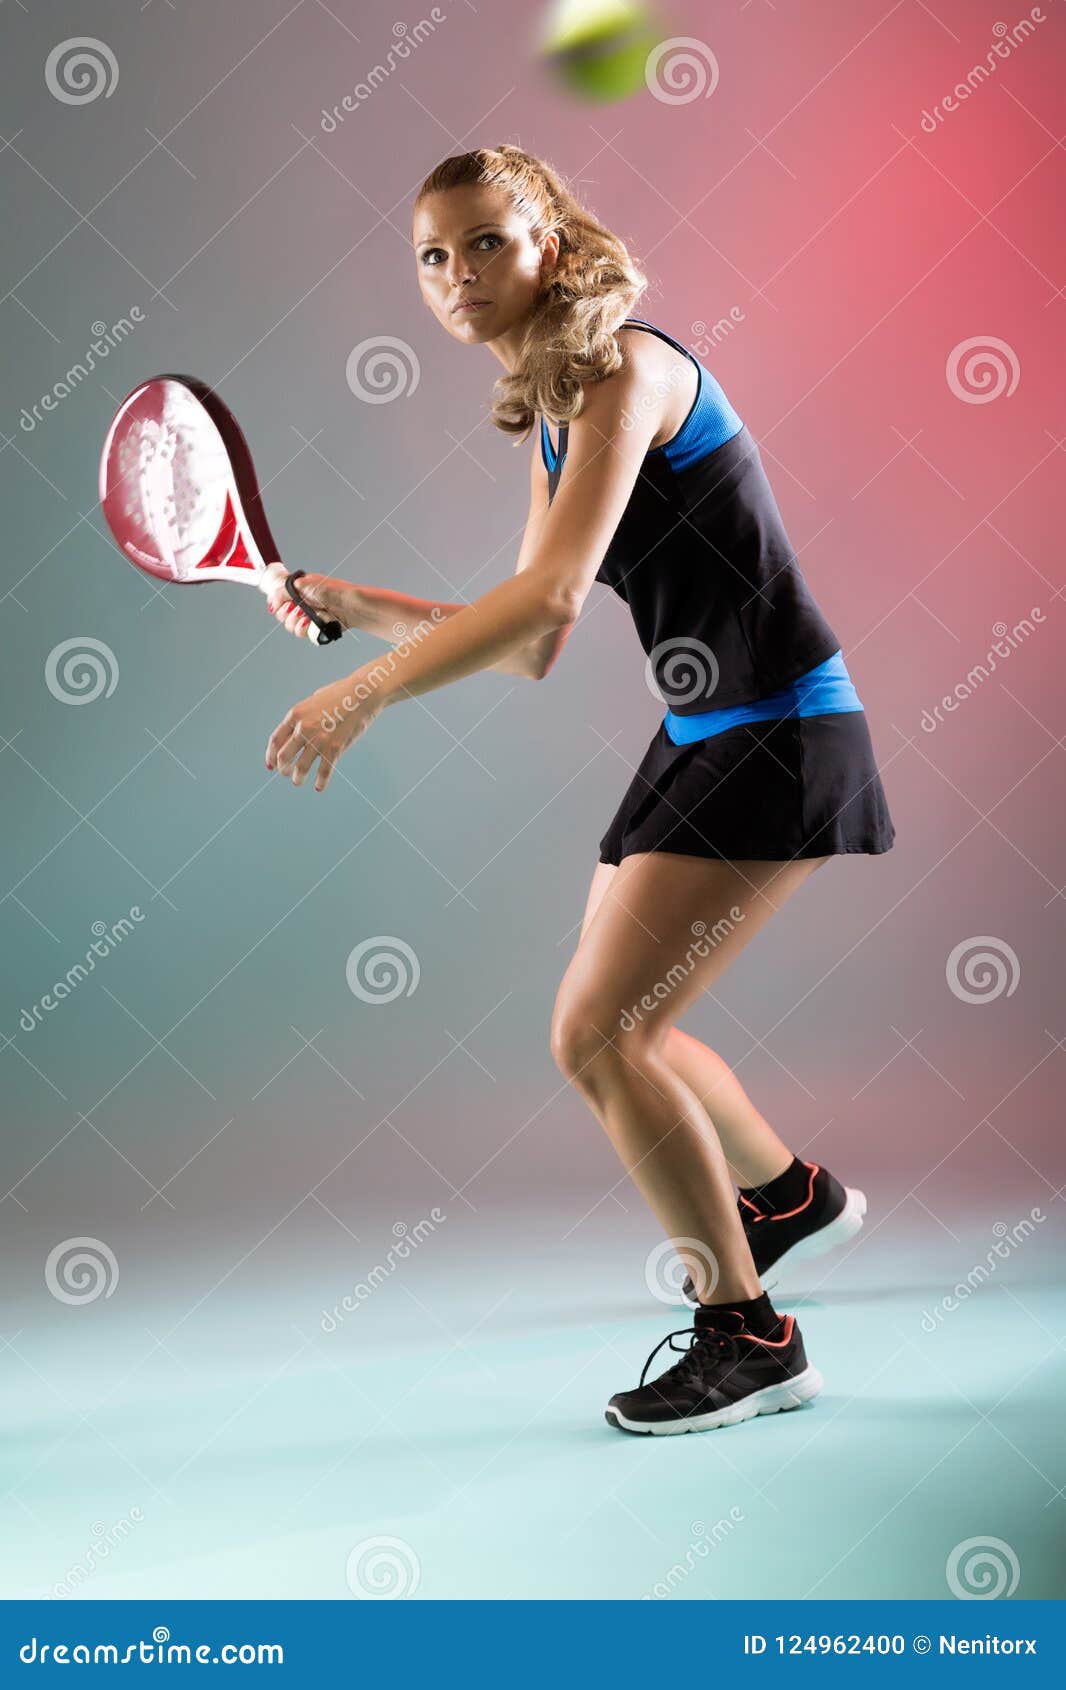 beautiful young woman playing padel indoor over multicolored background.